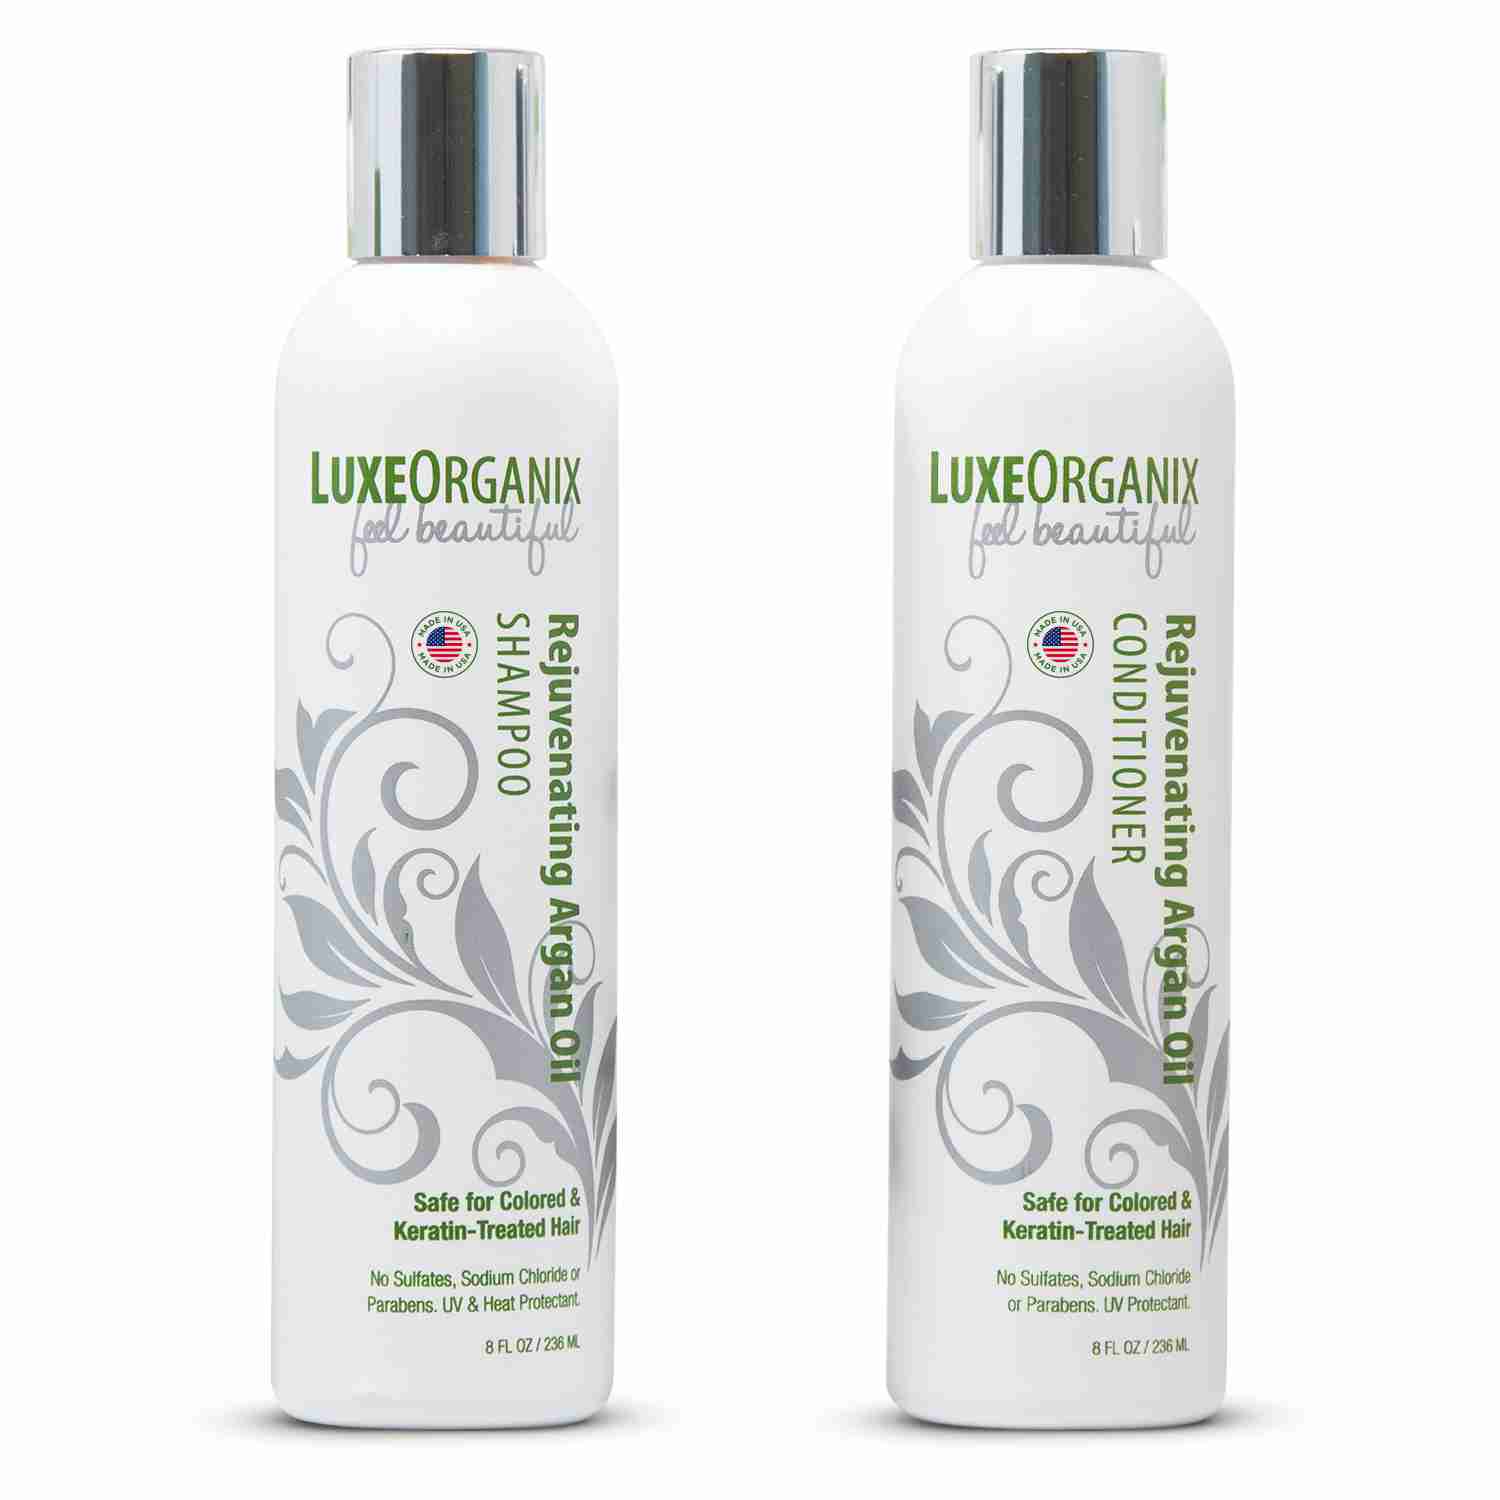 shampoo-and-conditioner-set with cash back rebate